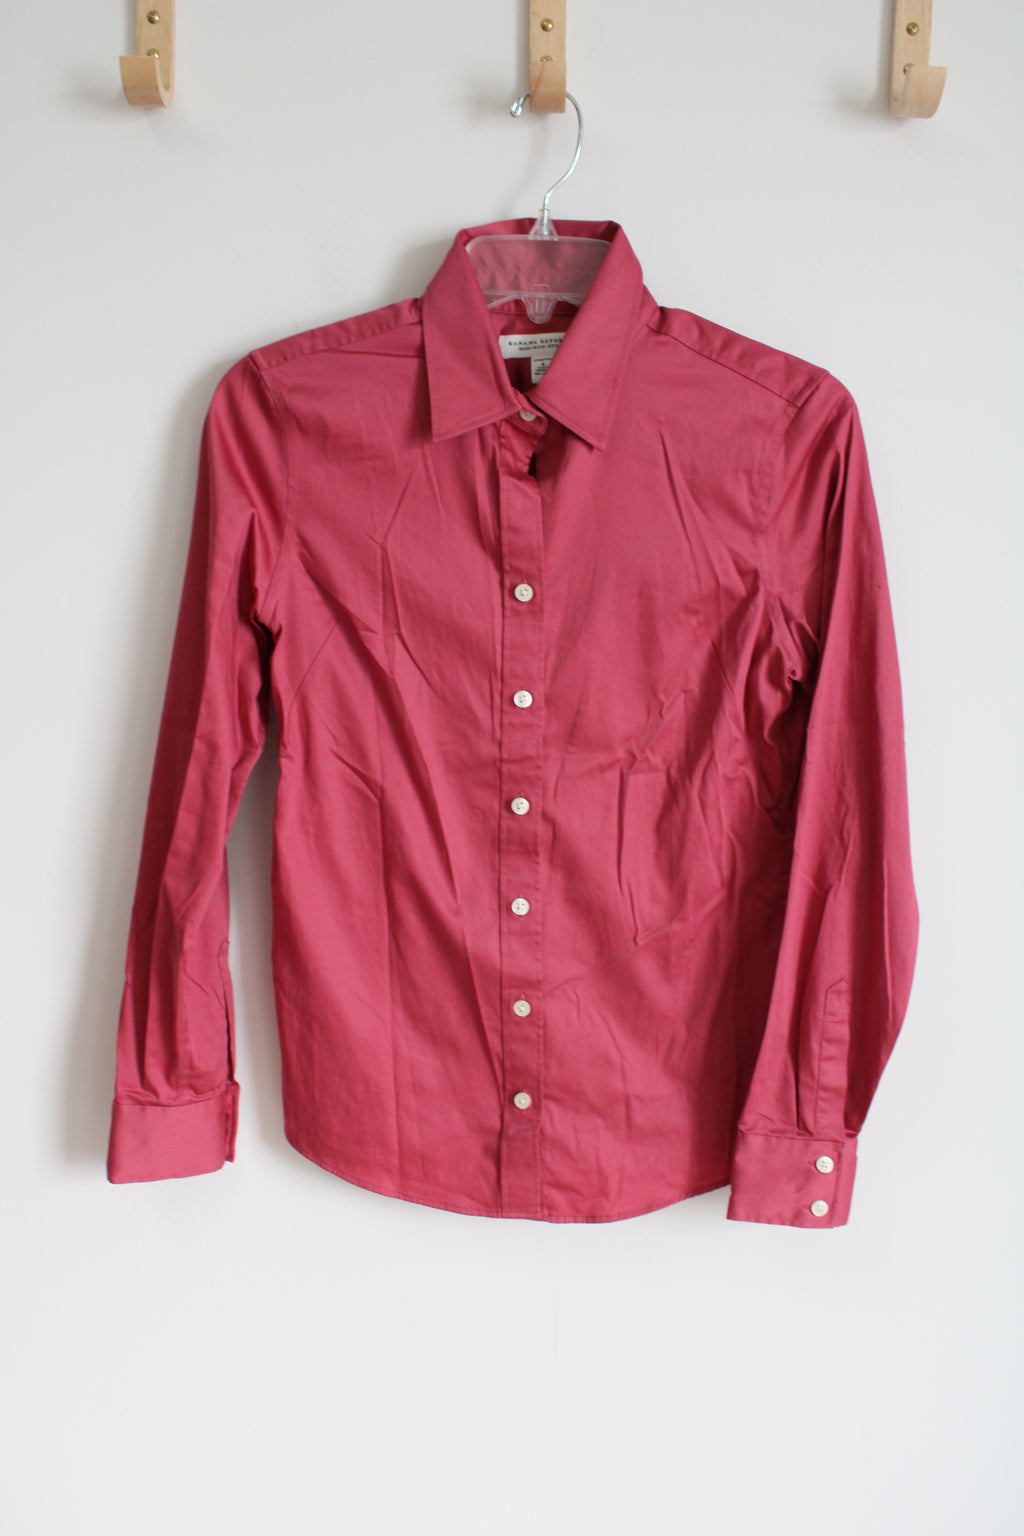 Banana Republic Non-Iron Fitted Stretch Button Down Pink Shirt | 4